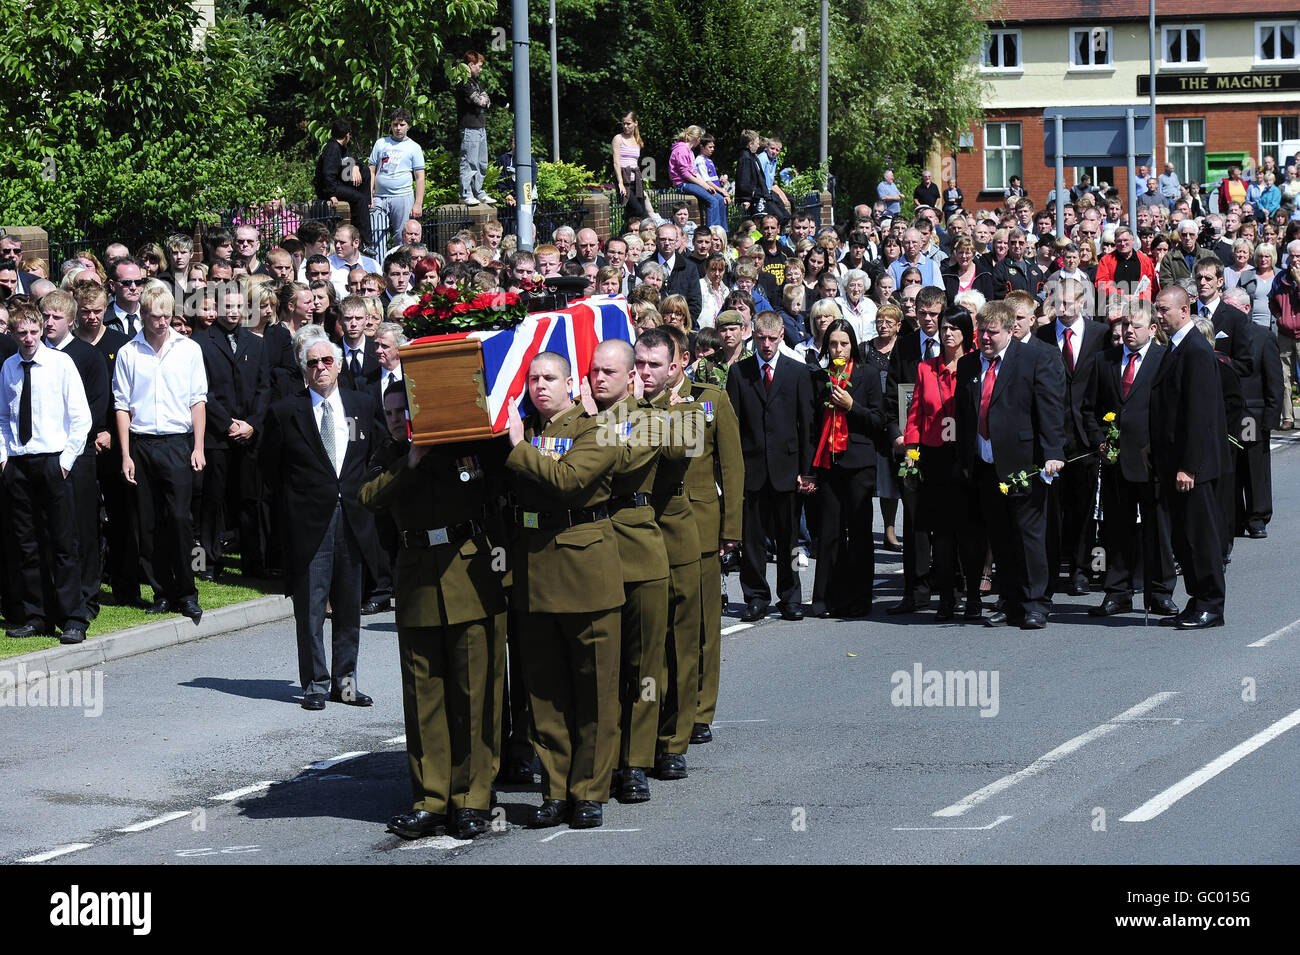 The family of Rifleman James Backhouse during the funeral procession for the soldier in Castleford, West Yorkshire. Backhouse died in an explosion near Sangin in Helmand province on July 10. Stock Photo